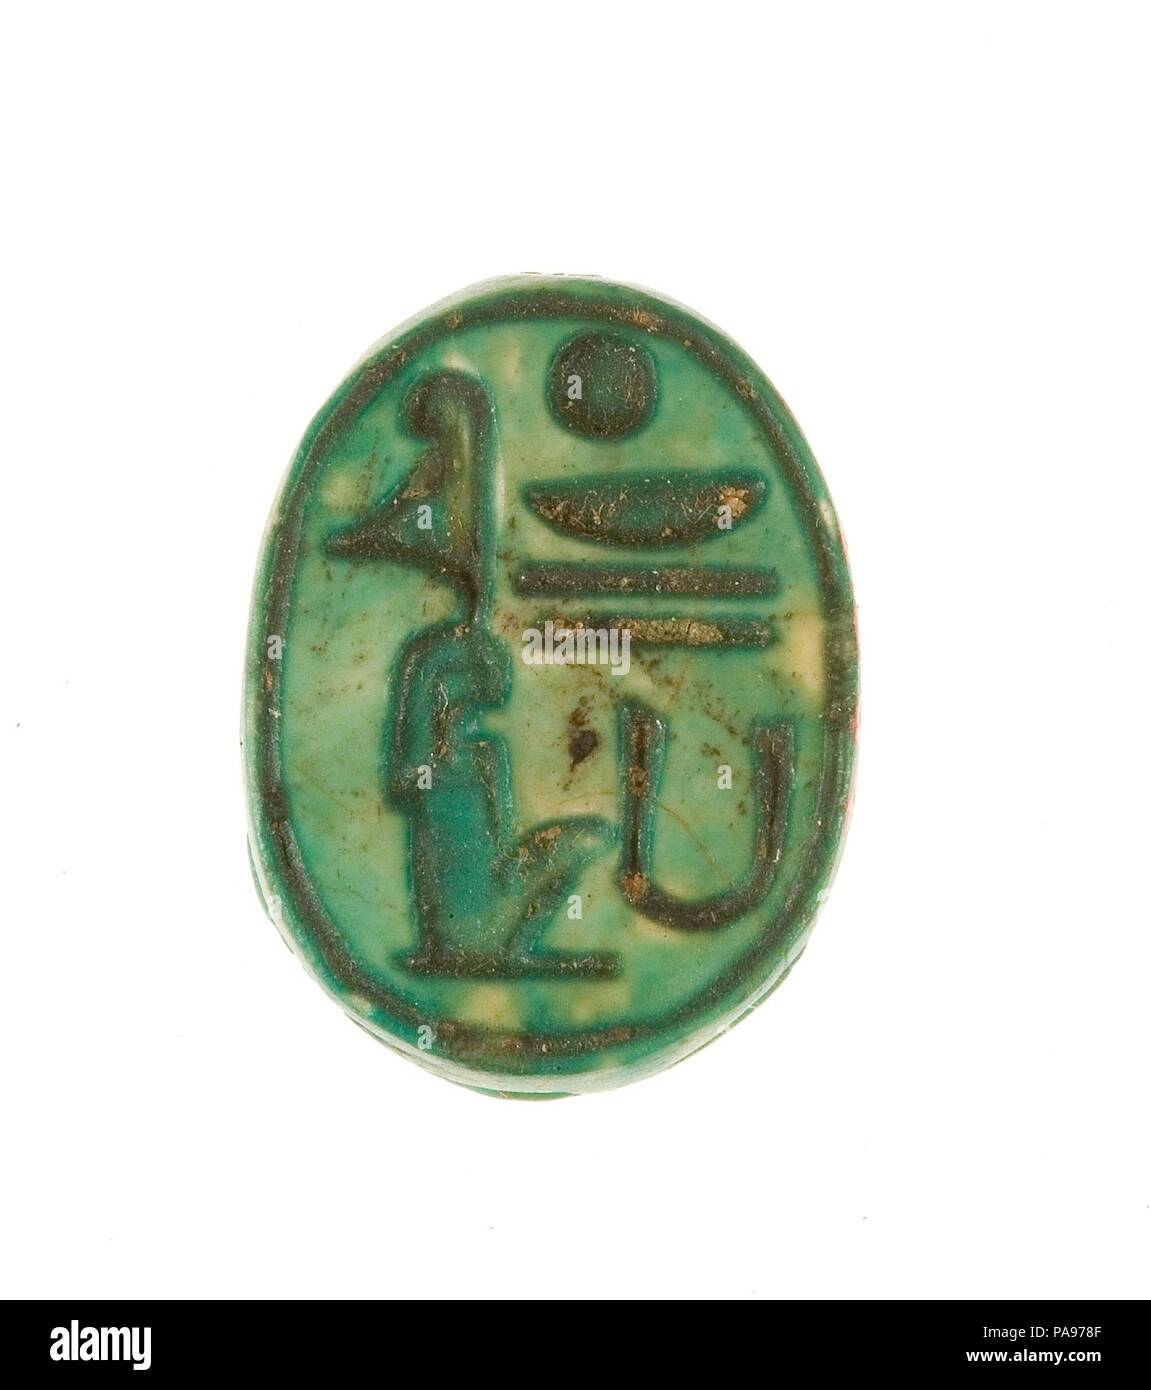 Scarab Inscribed Lord of the Two Lands Maatkare (Hatshepsut). Dynasty: Dynasty 18, early. Reign: Joint reign of Hatshepsut and Thutmose III. Date: ca. 1479-1458 B.C.. Museum: Metropolitan Museum of Art, New York, USA. Stock Photo